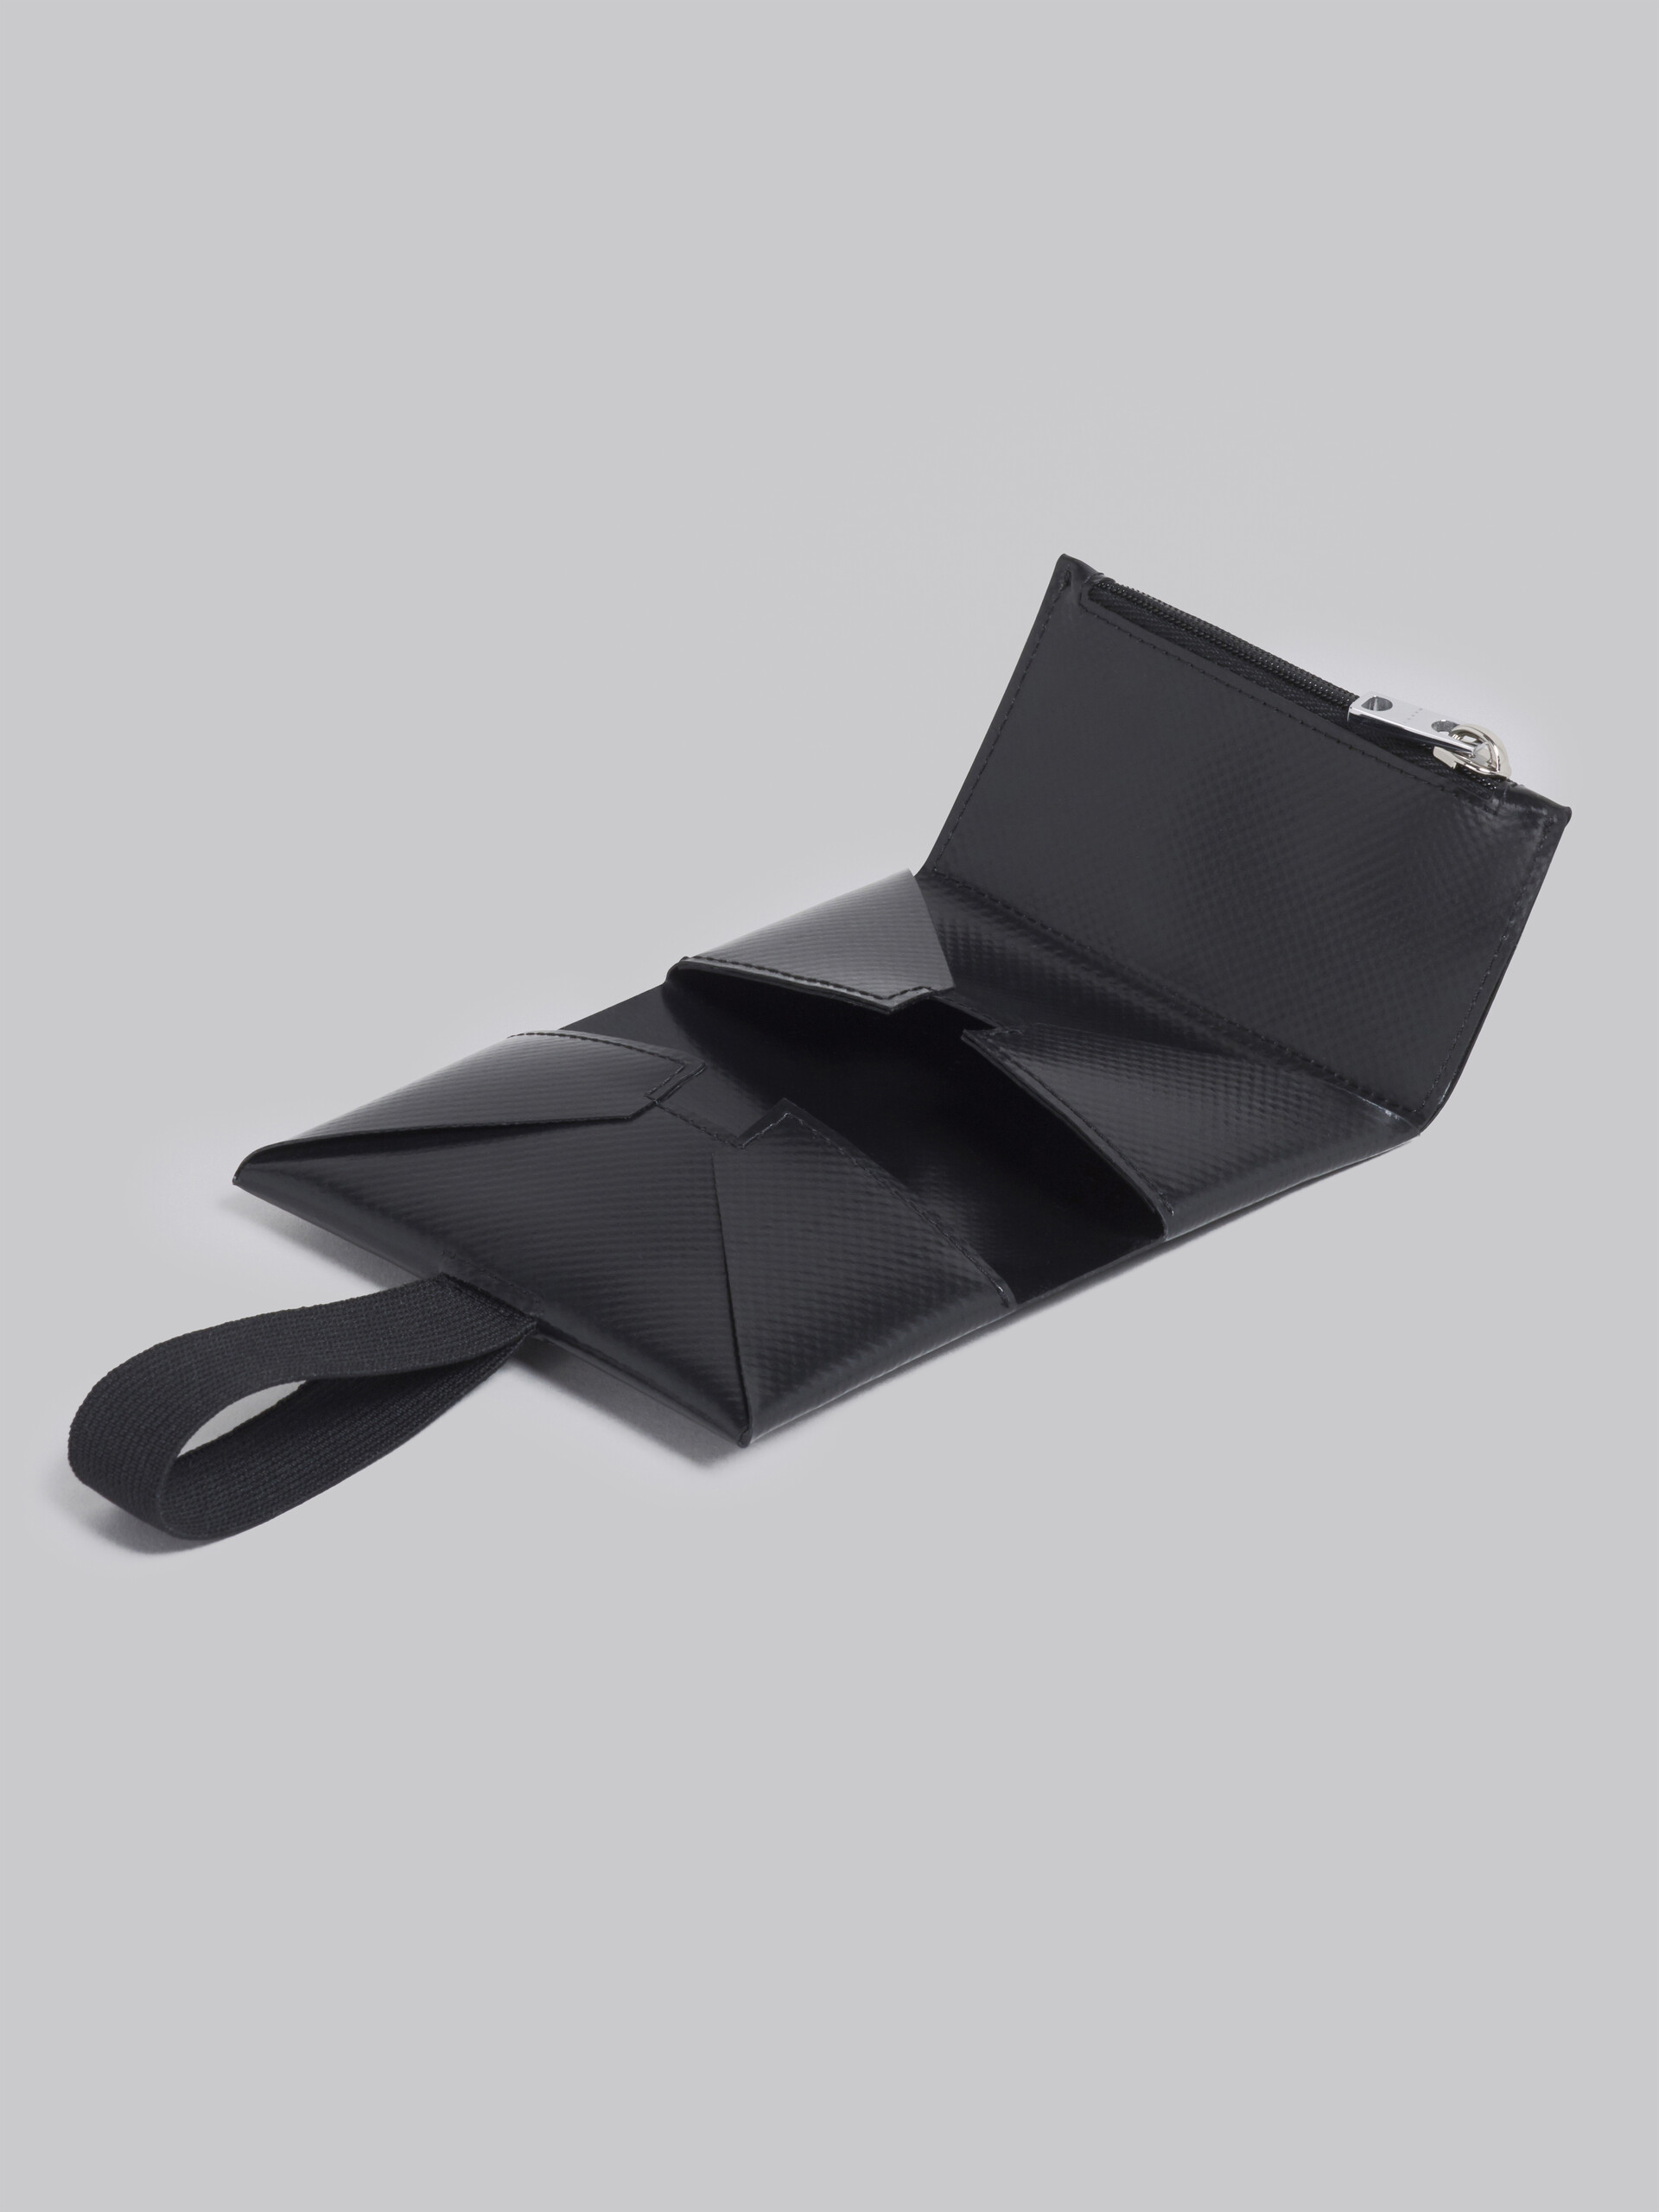 PVC wallet with black origami construction - Wallets - Image 5